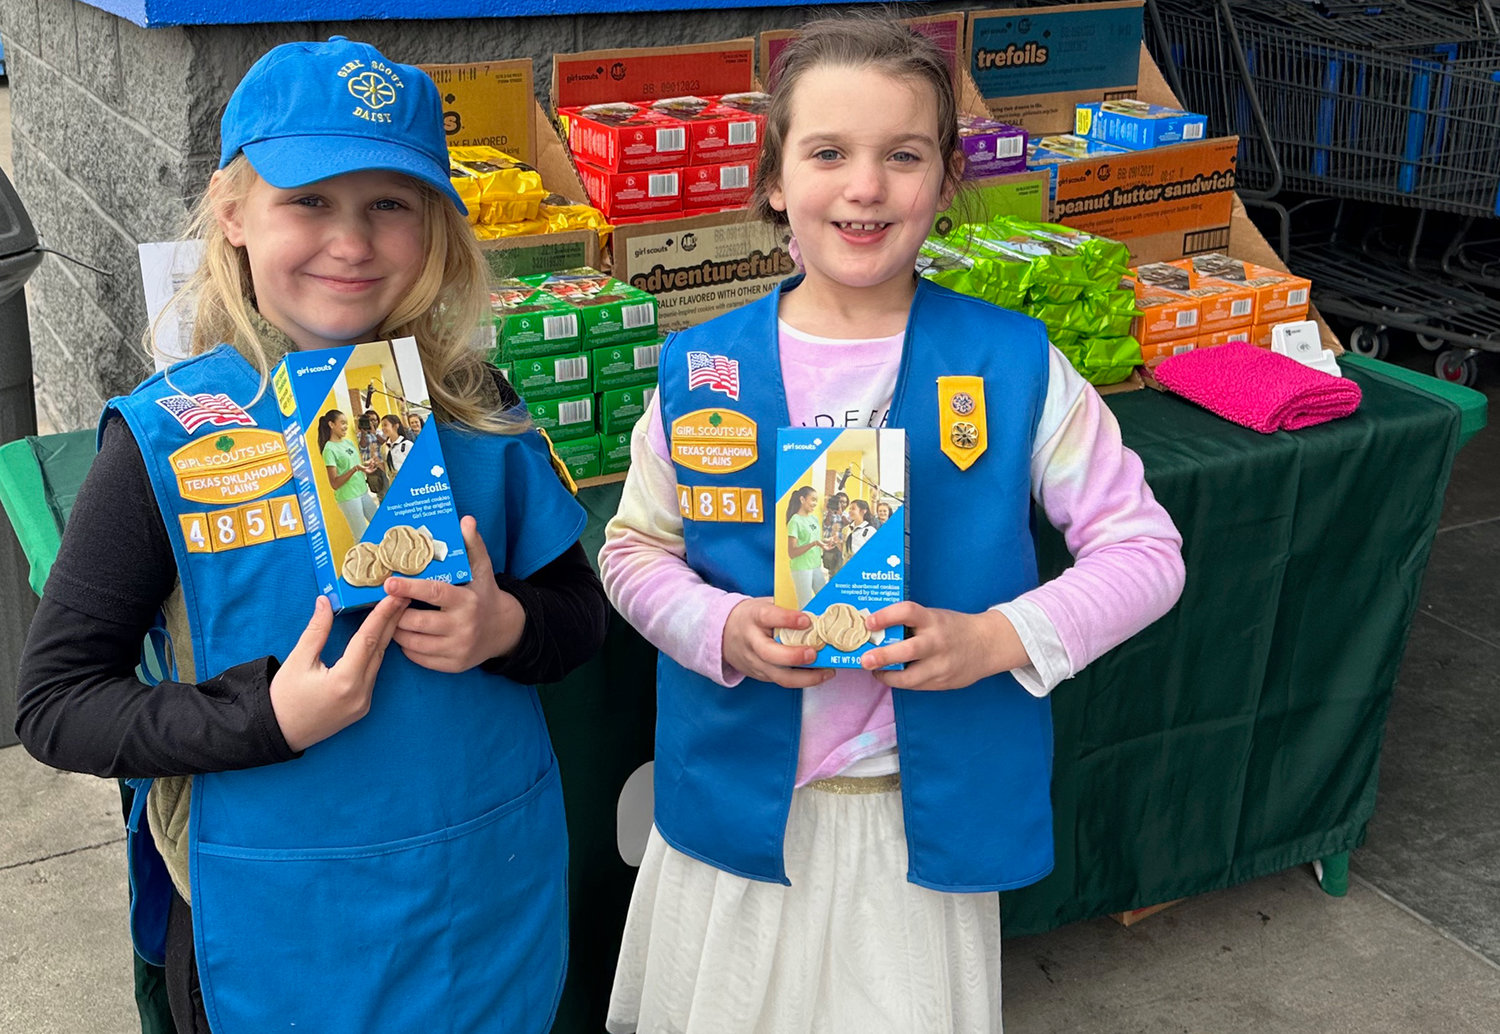 McKenzie May, first-grader at Coder Elementary School and Stella Price, first-grader at Southwest Christian School, approached the end of Girl Scout Cookie sales at Wal-Mart in Hudson Oaks. Both girls are part of the new Daisy Girl Scout Troop #4854 that just started in January. The troop sold a told of 6,108 boxes and will donate a large number of boxes to first responders as a result of so many donations given at their booths.